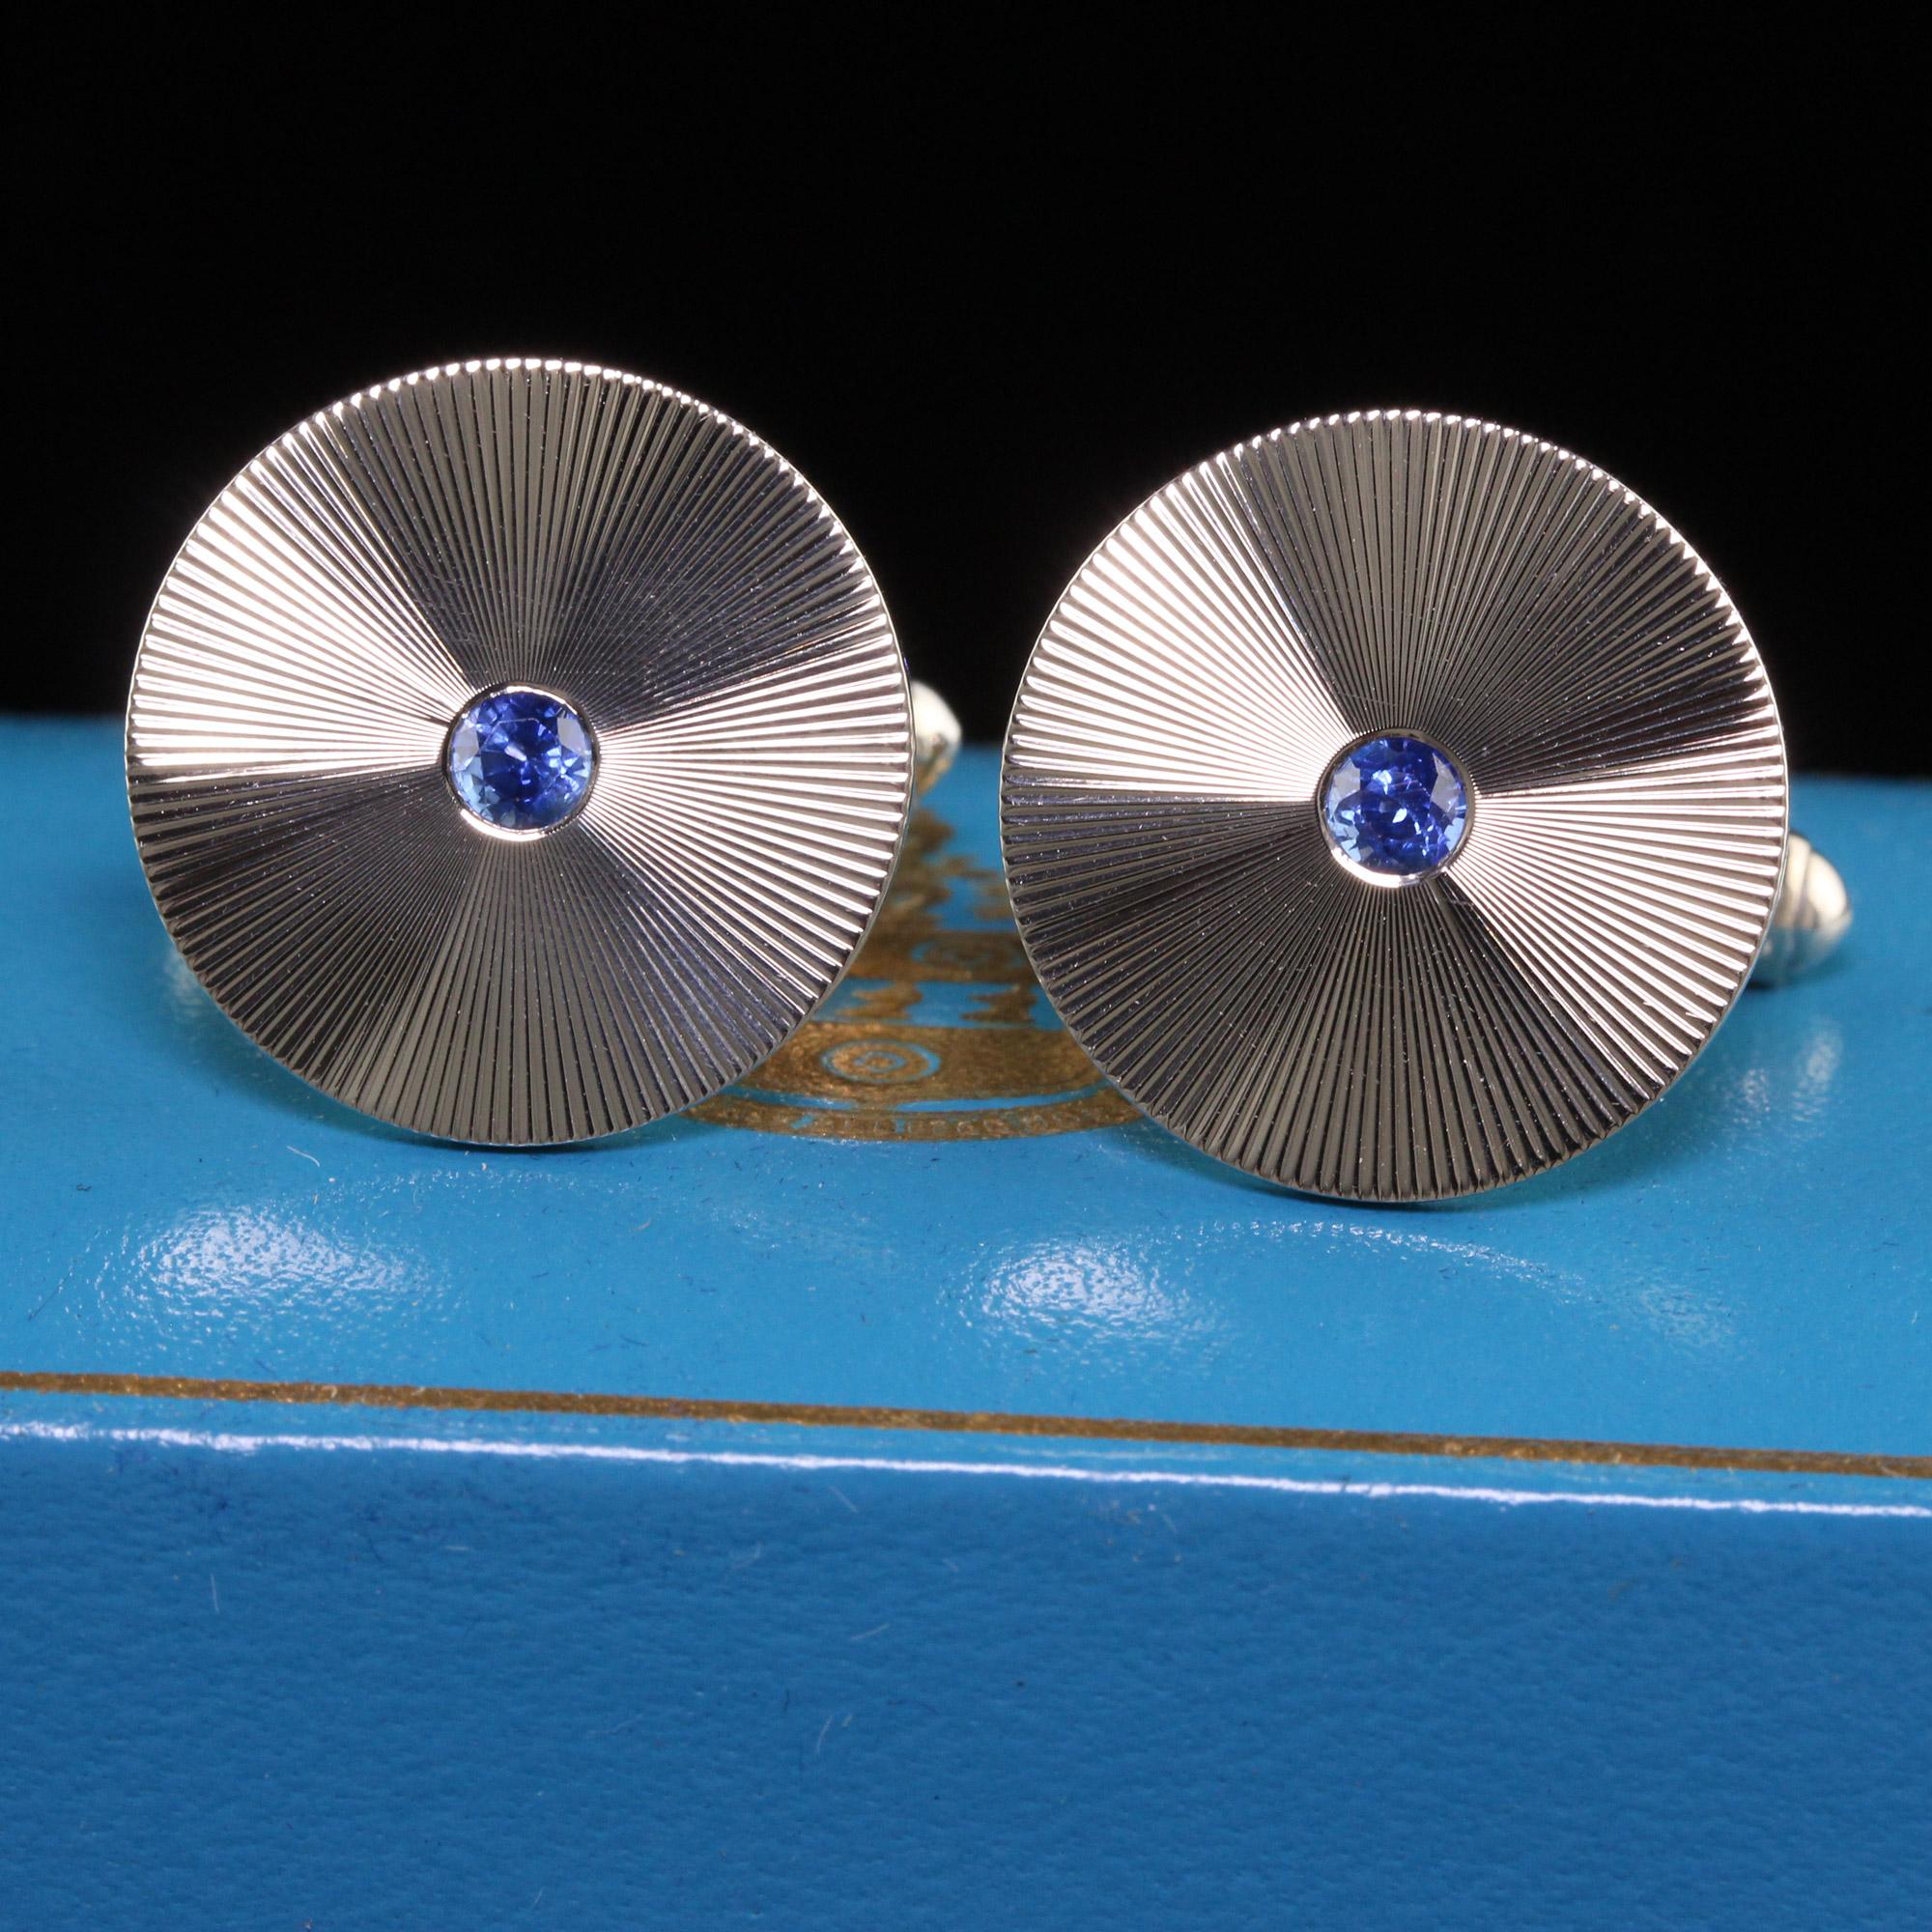 Beautiful Vintage Retro C.D. Peacock 14K White Gold Natural Sapphire Cufflinks. This beautiful pair of cufflinks are crafted in 14k white gold. The center of each cufflink holds a natural blue sapphire with exceptional color and brilliance. The